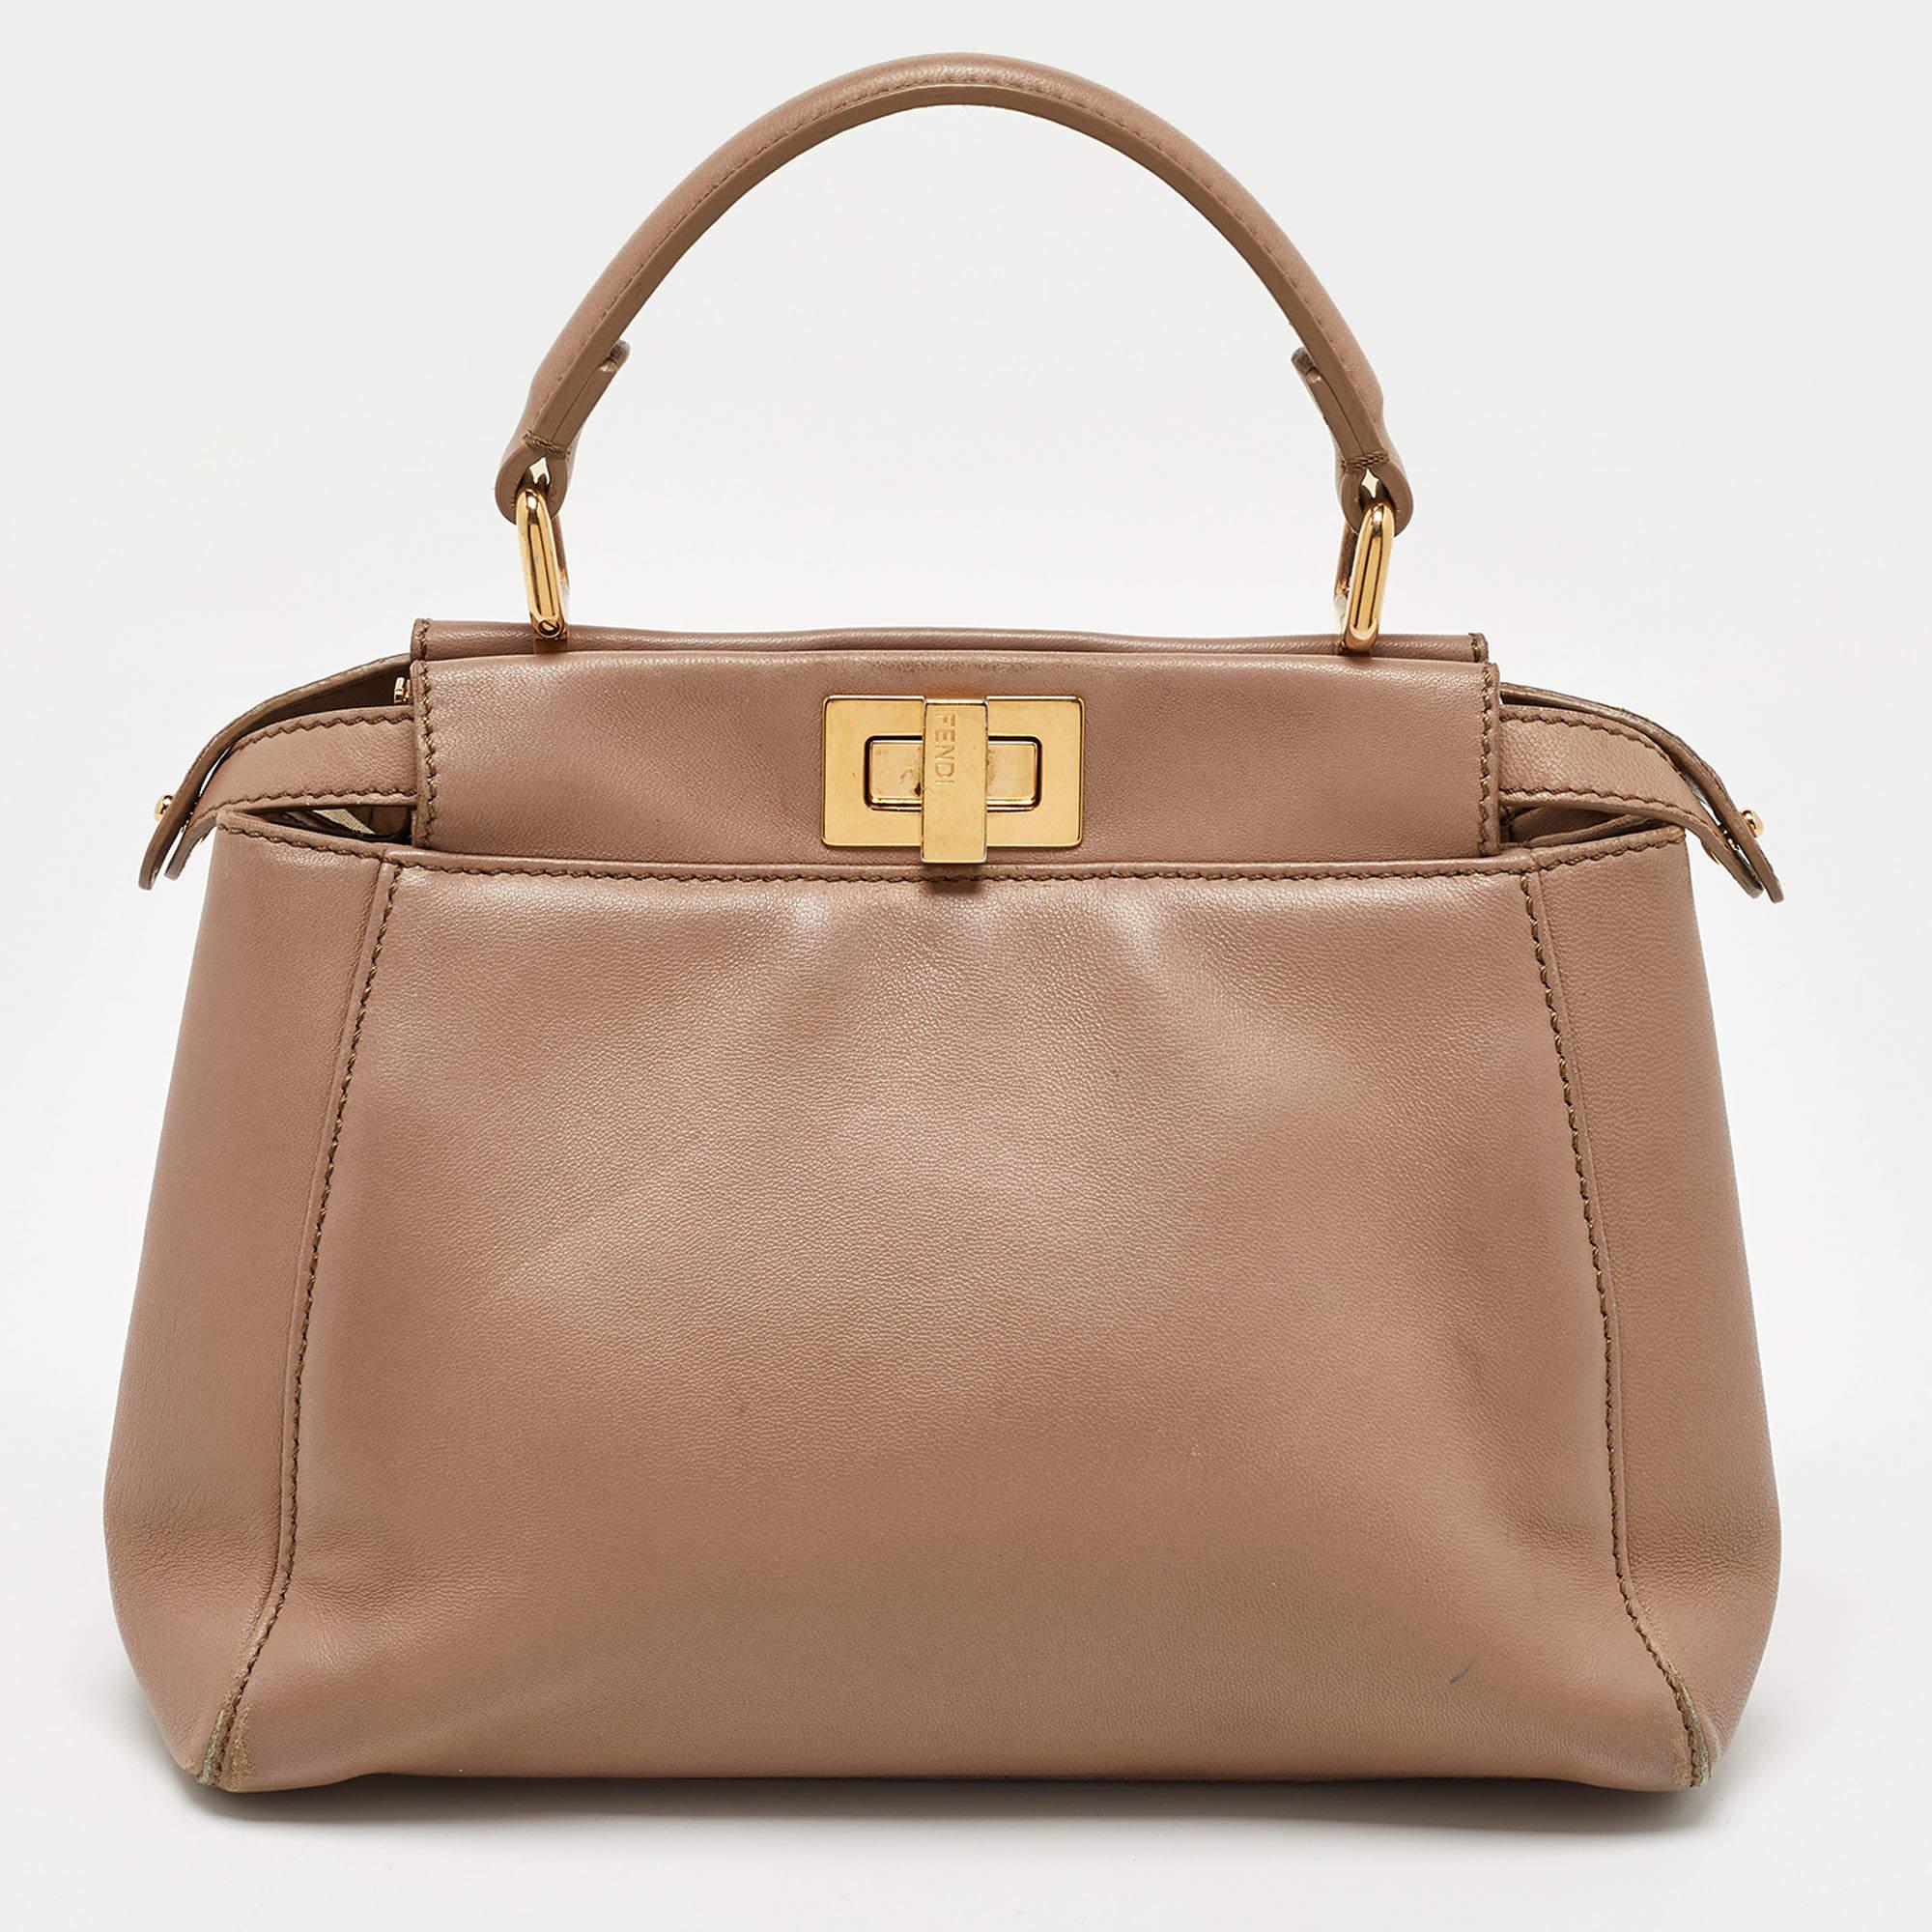 Displaying exquisite craftsmanship, this fabulous bag will certainly live up to your expectations. Featuring a chic design, it is made from luxe materials and has a roomy interior for carrying your essentials.

Includes: Detachable Strap